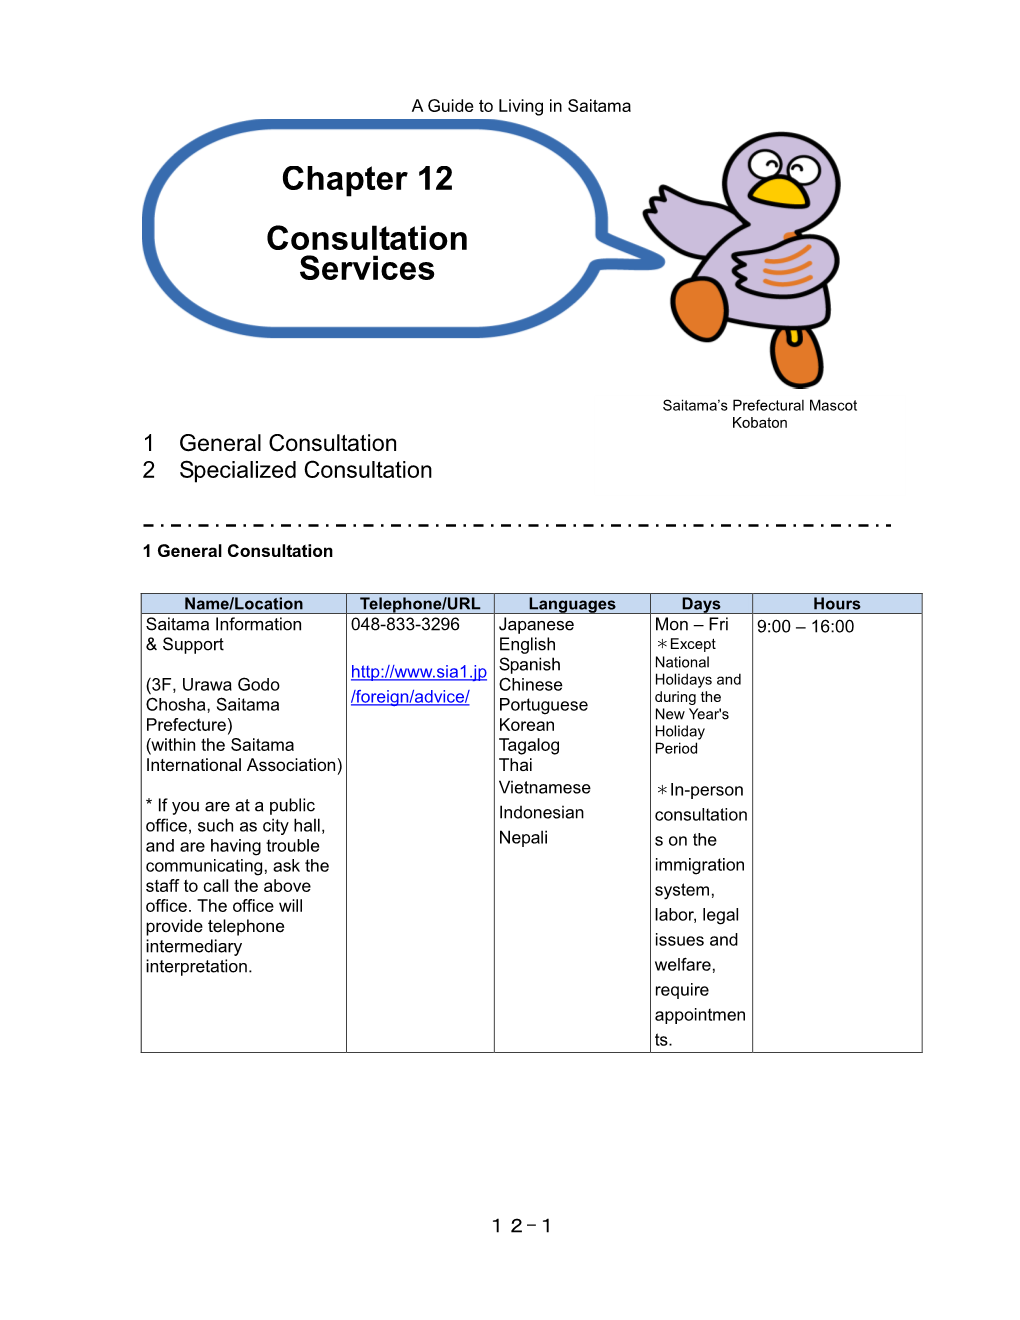 Chapter 12 Consultation Services